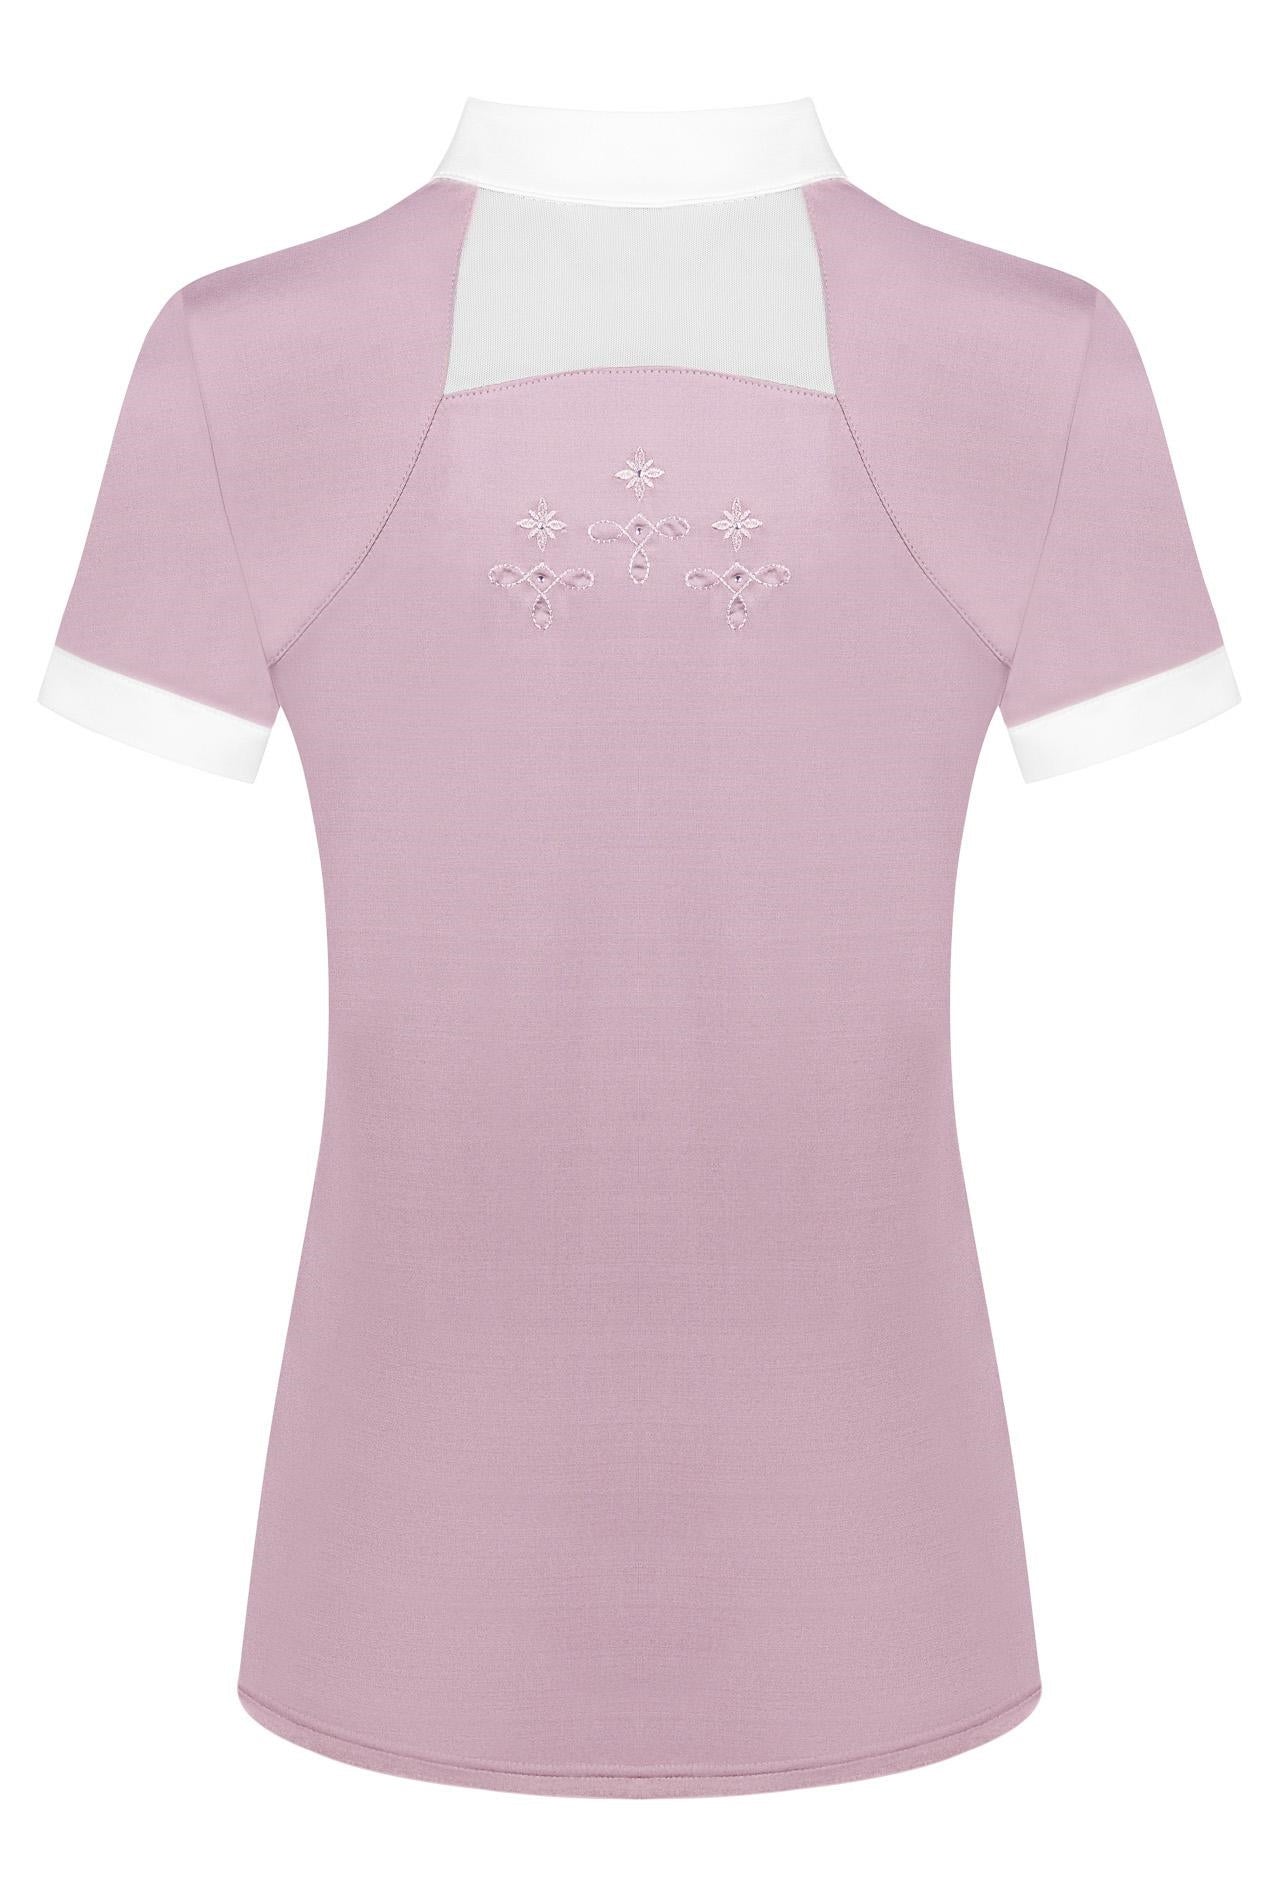 light pink shirt for competitions